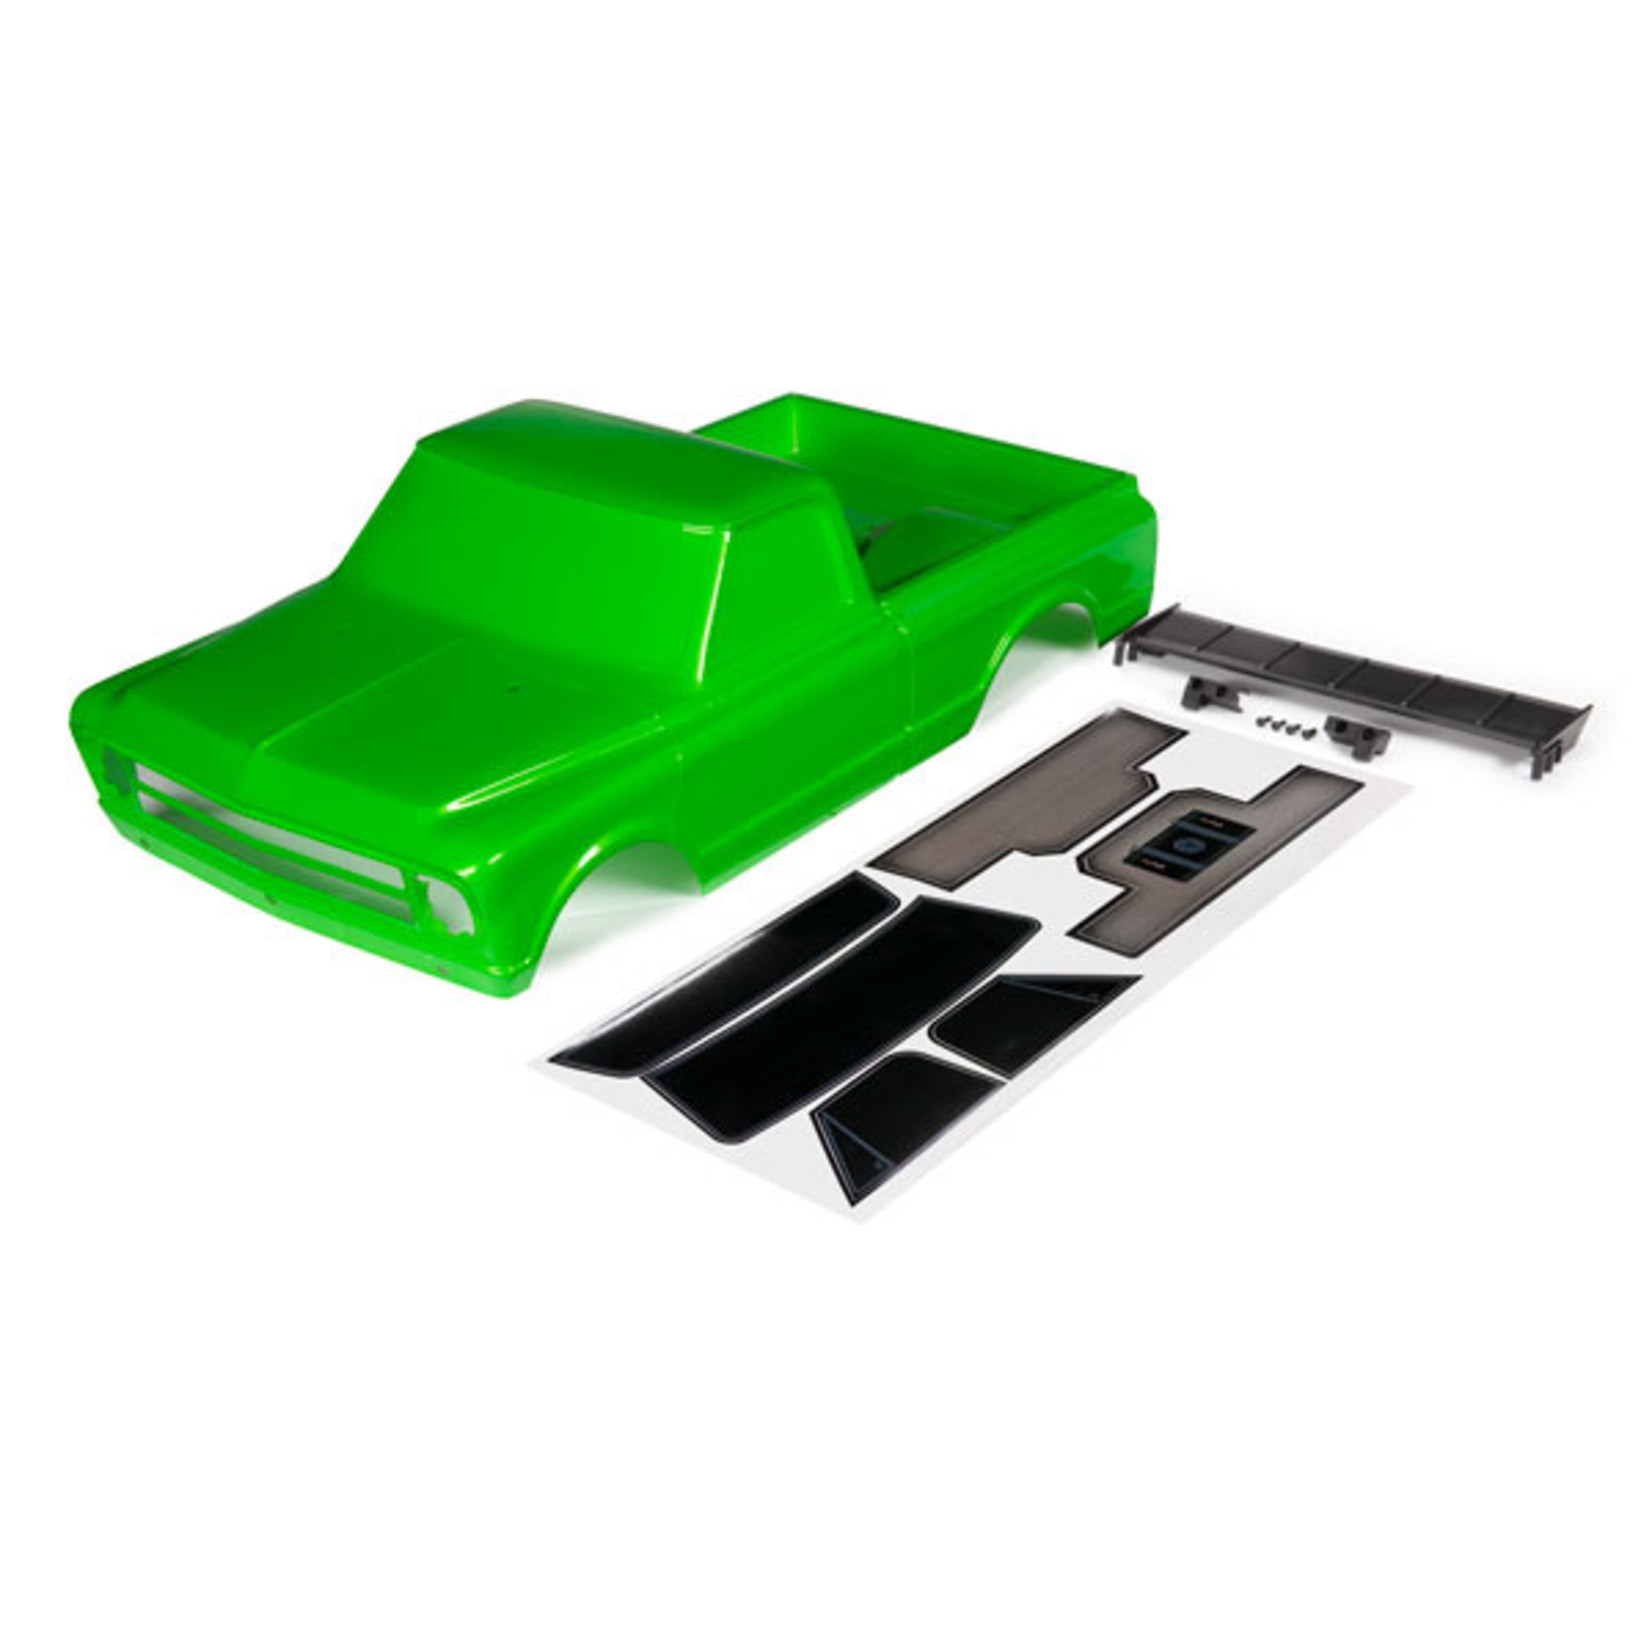 Traxxas 9411G - Body, Chevrolet C10, green (painted) (includes